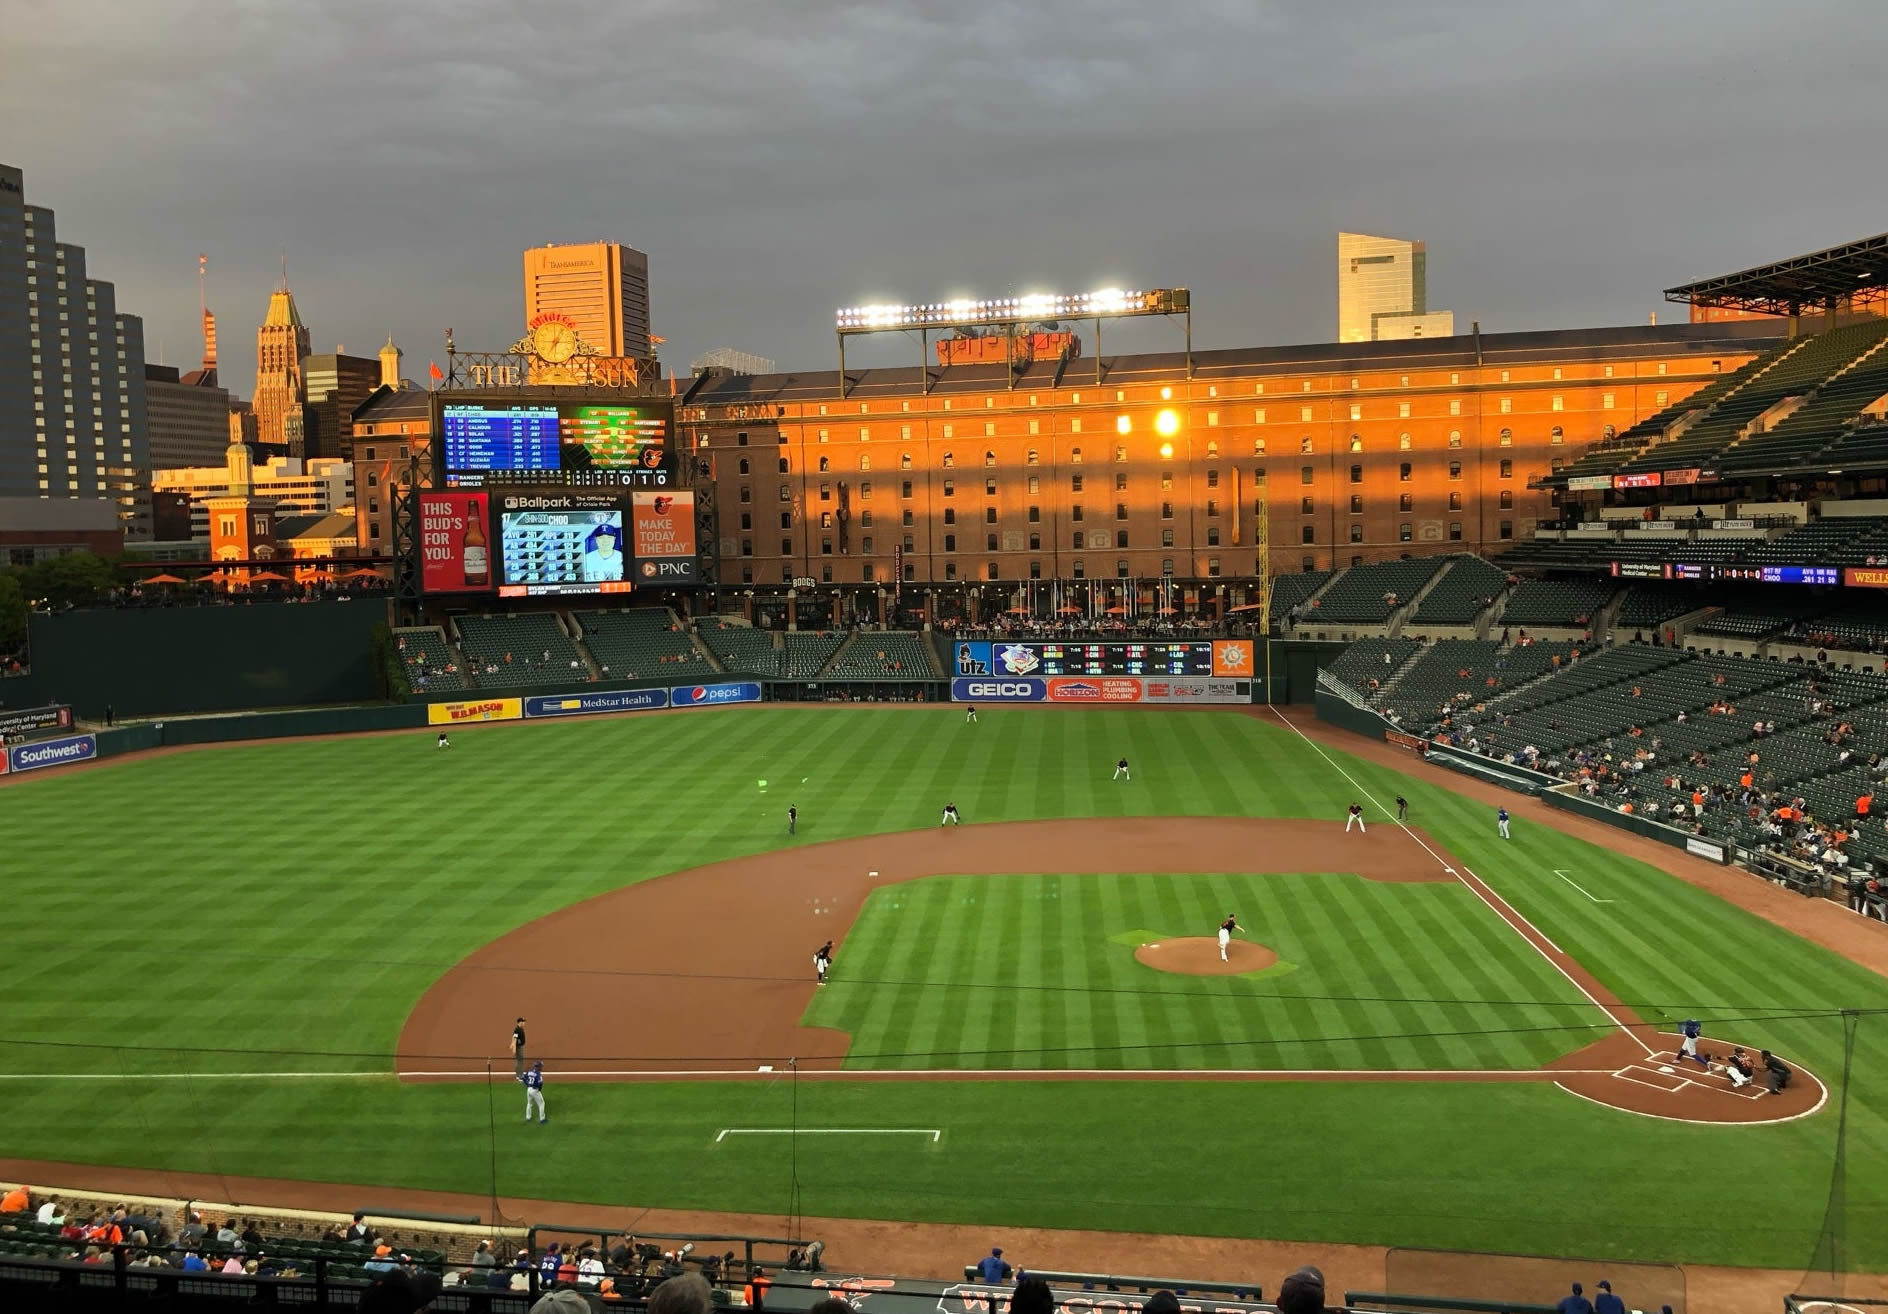 Oriole Park Seating Chart